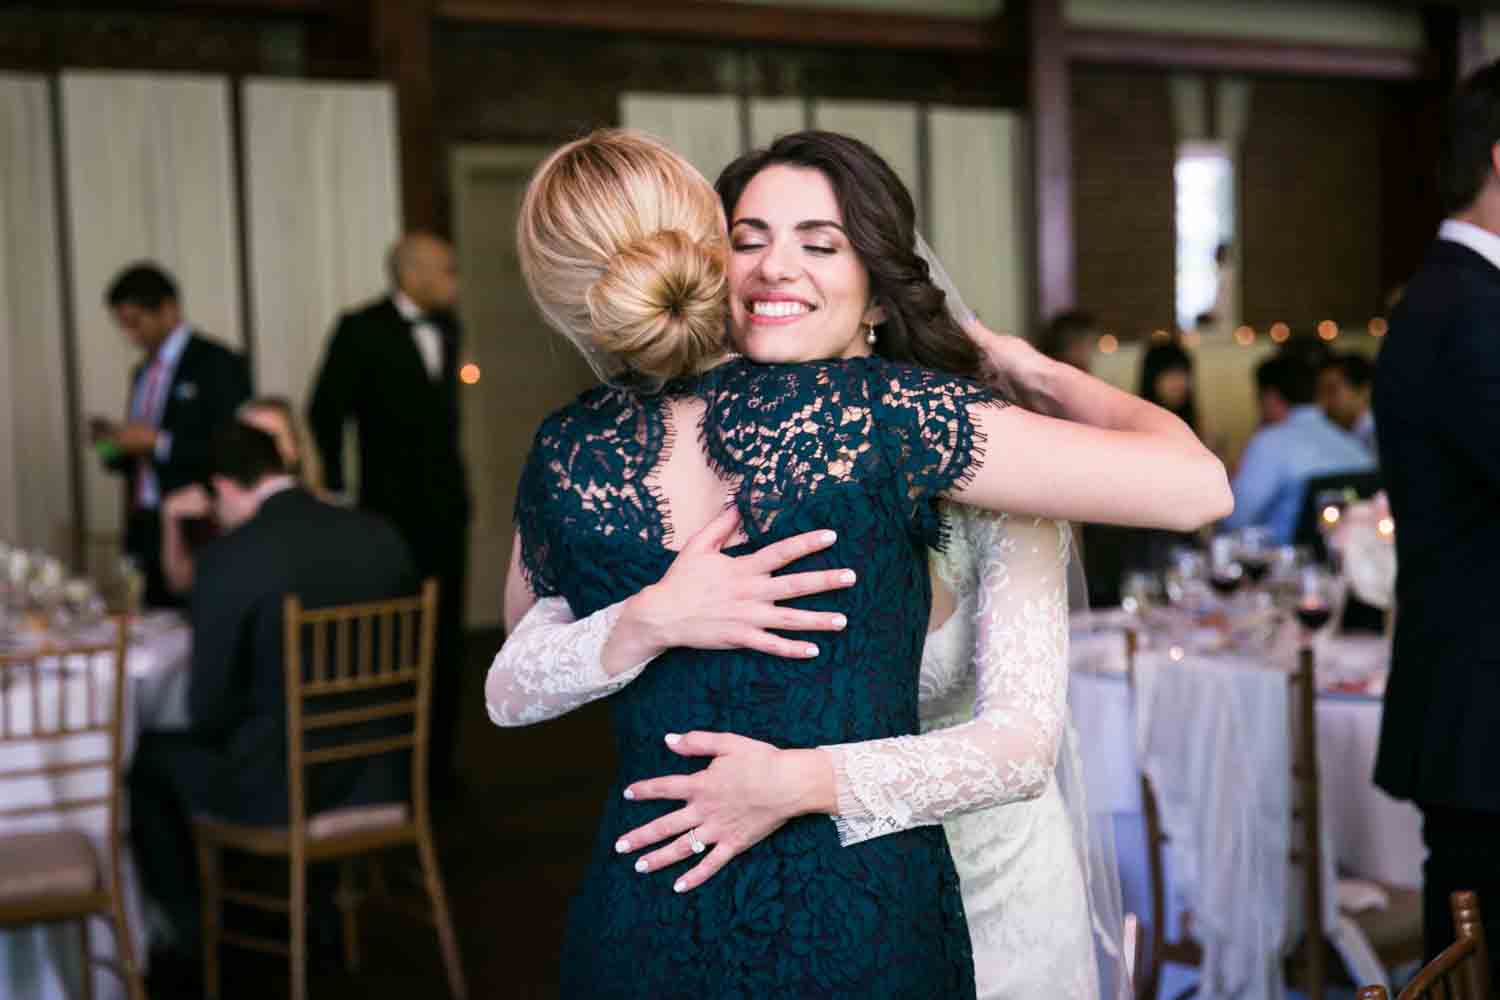 Bride hugging female guest at a Loeb Boathouse wedding in Central Park